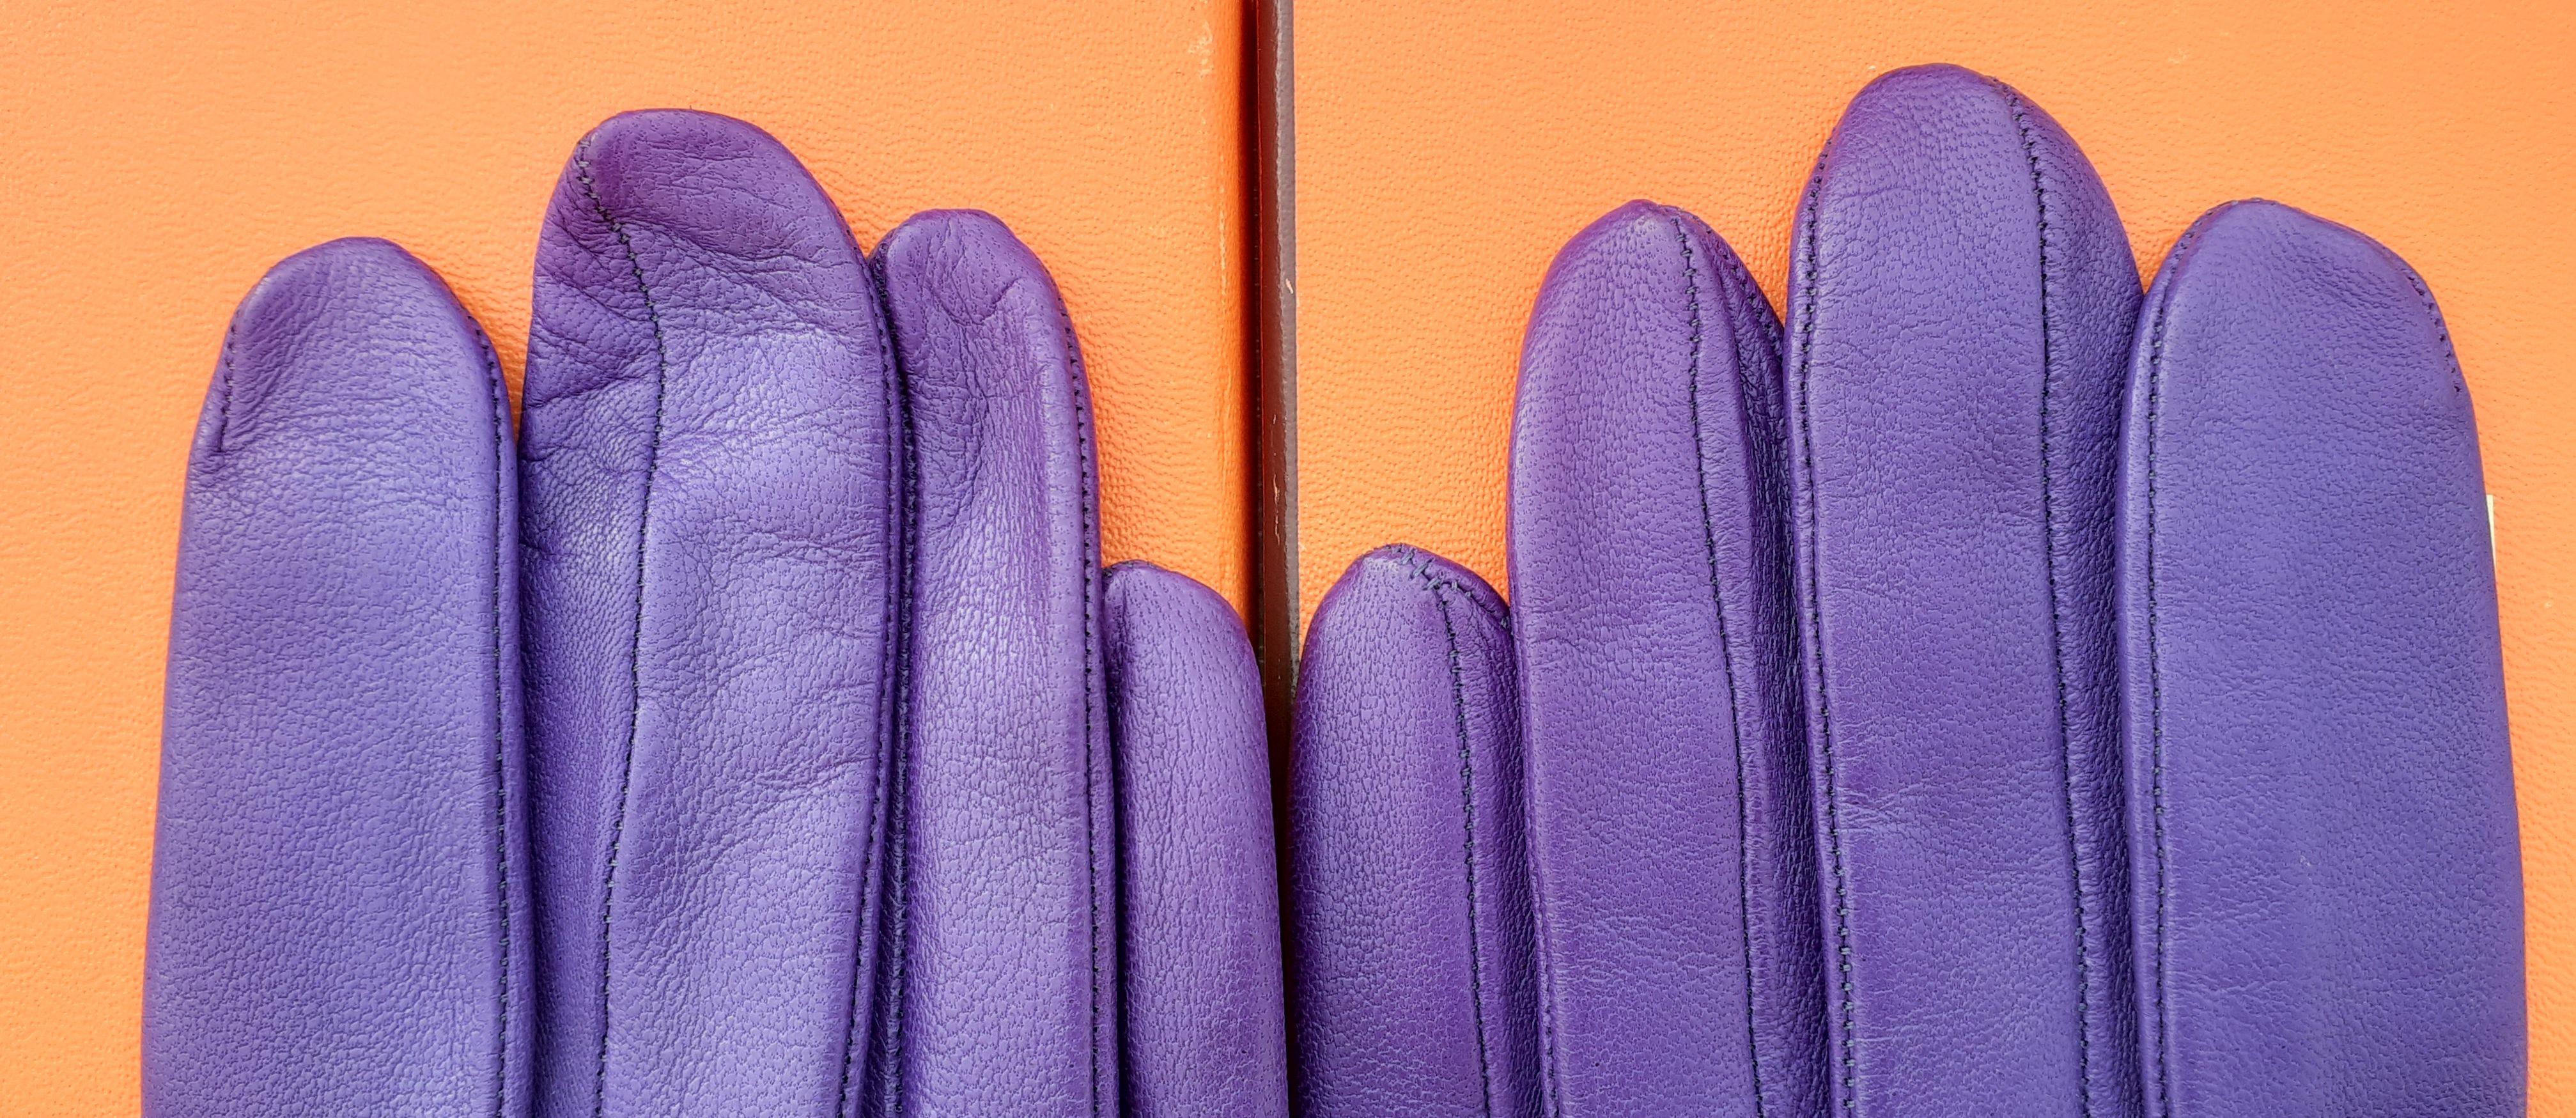 Lovely Hermès Gloves Purple Pink Leather Size 7.5 For Sale 1